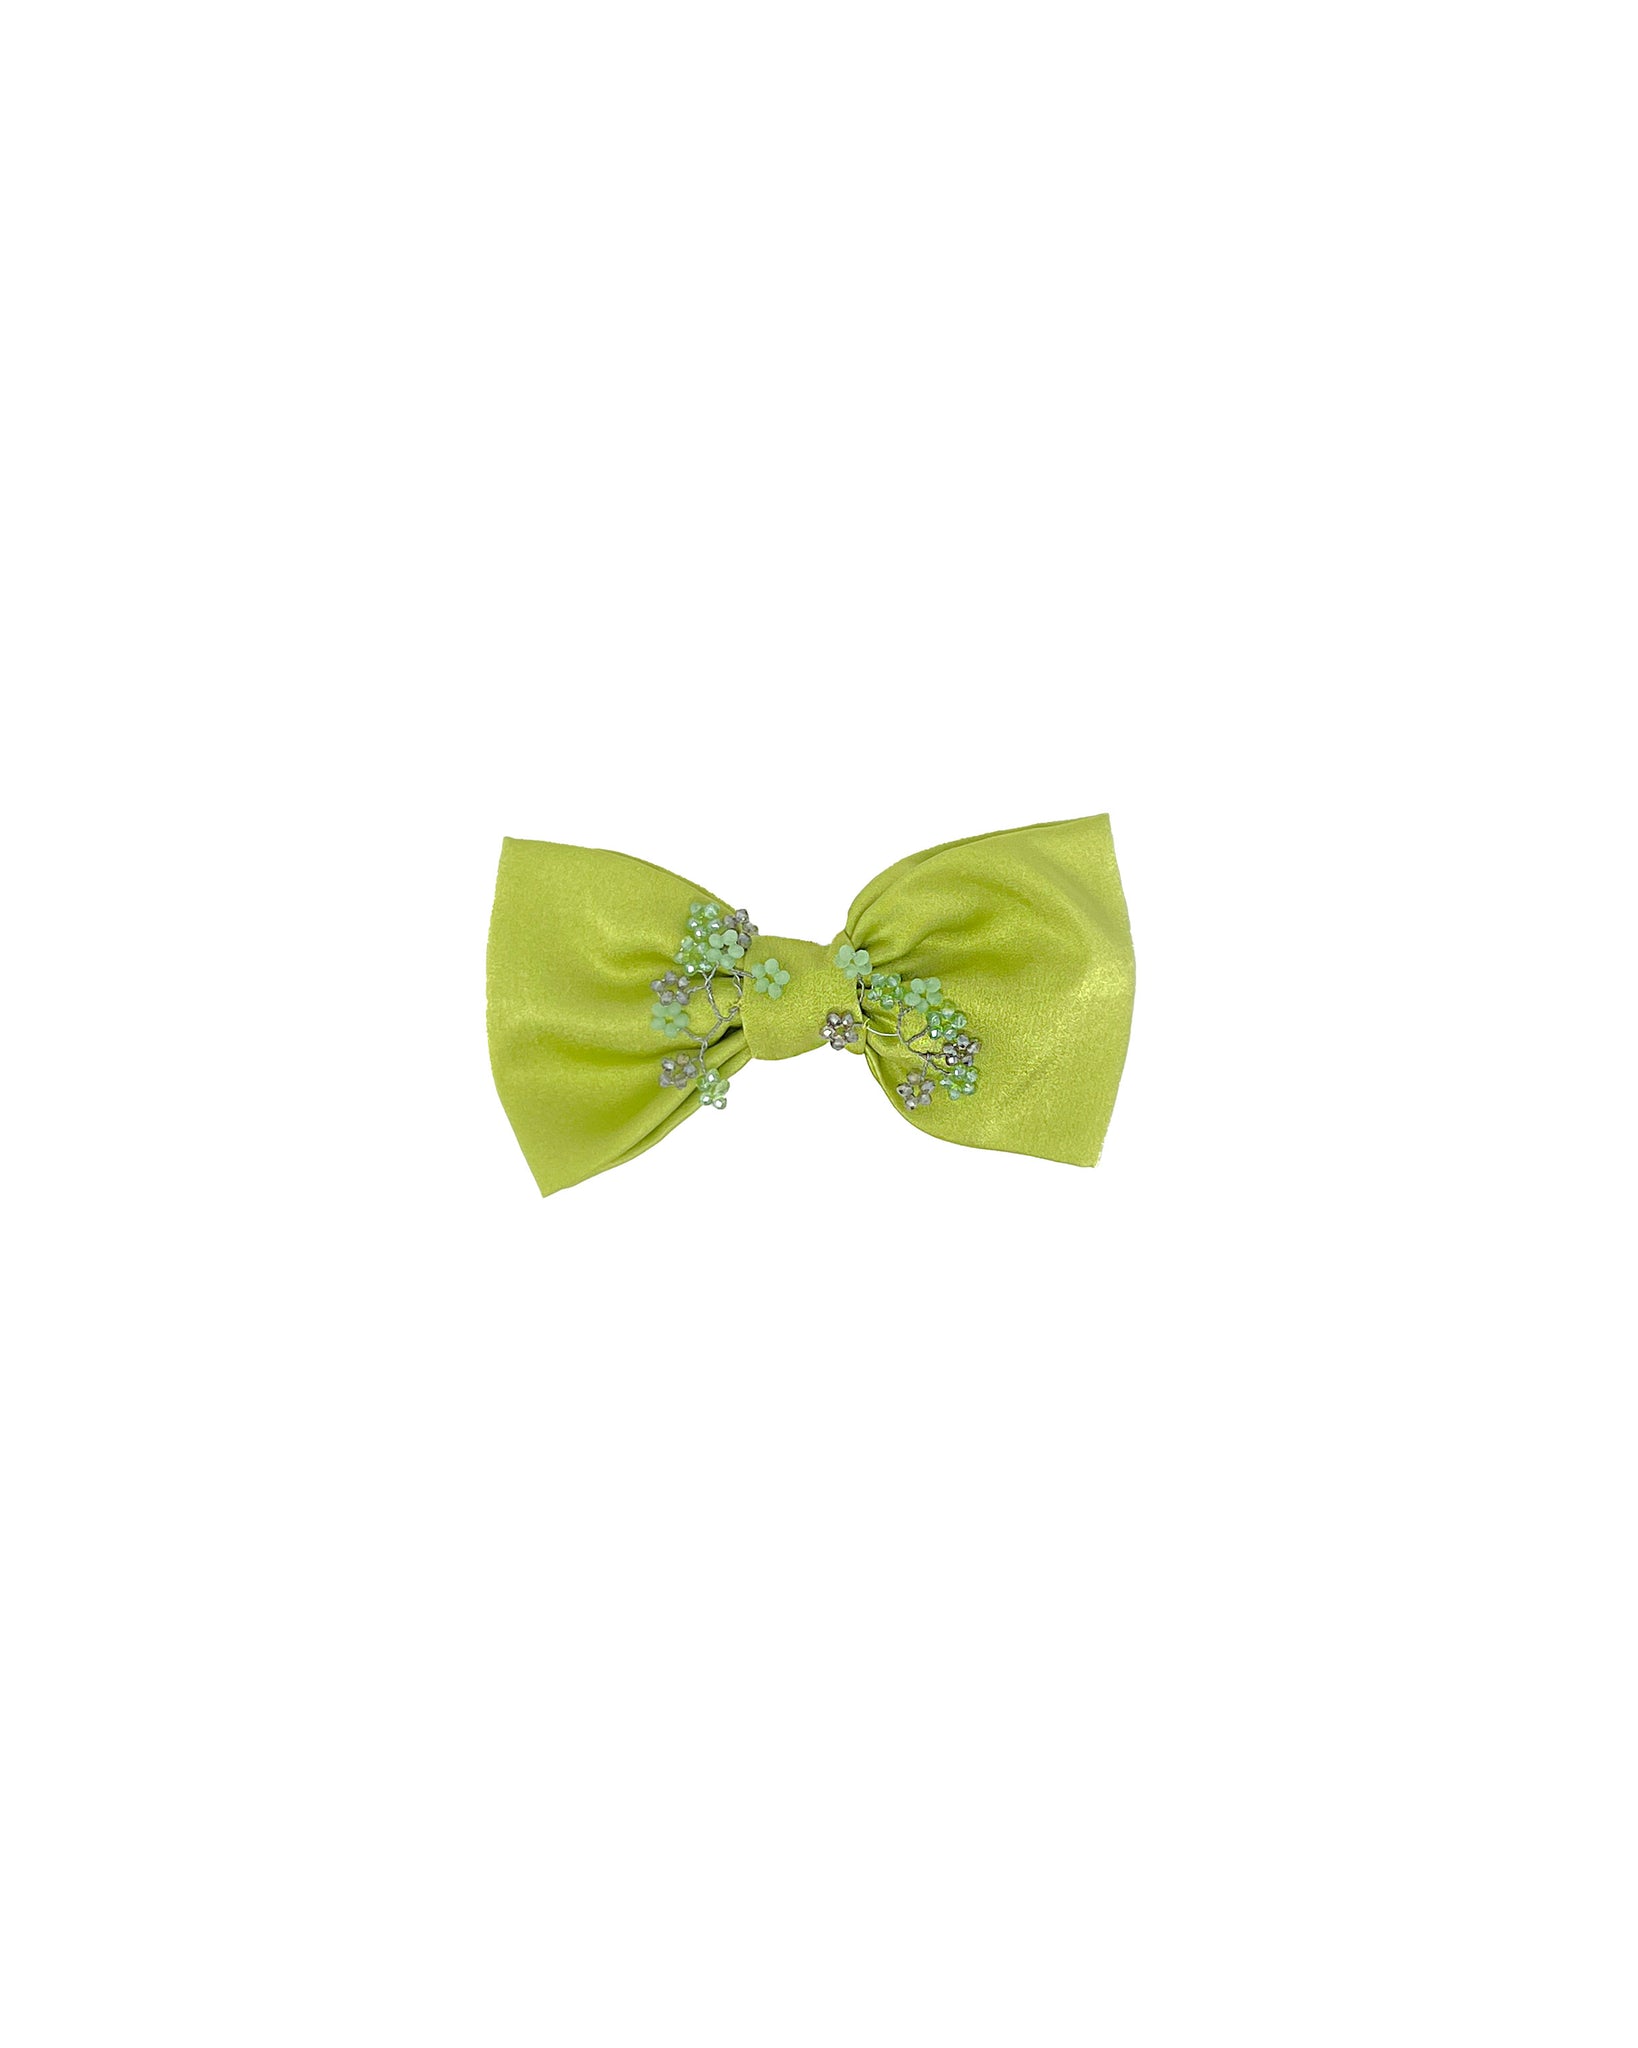 Lime green satin hair bow with embroidered crystal flowers